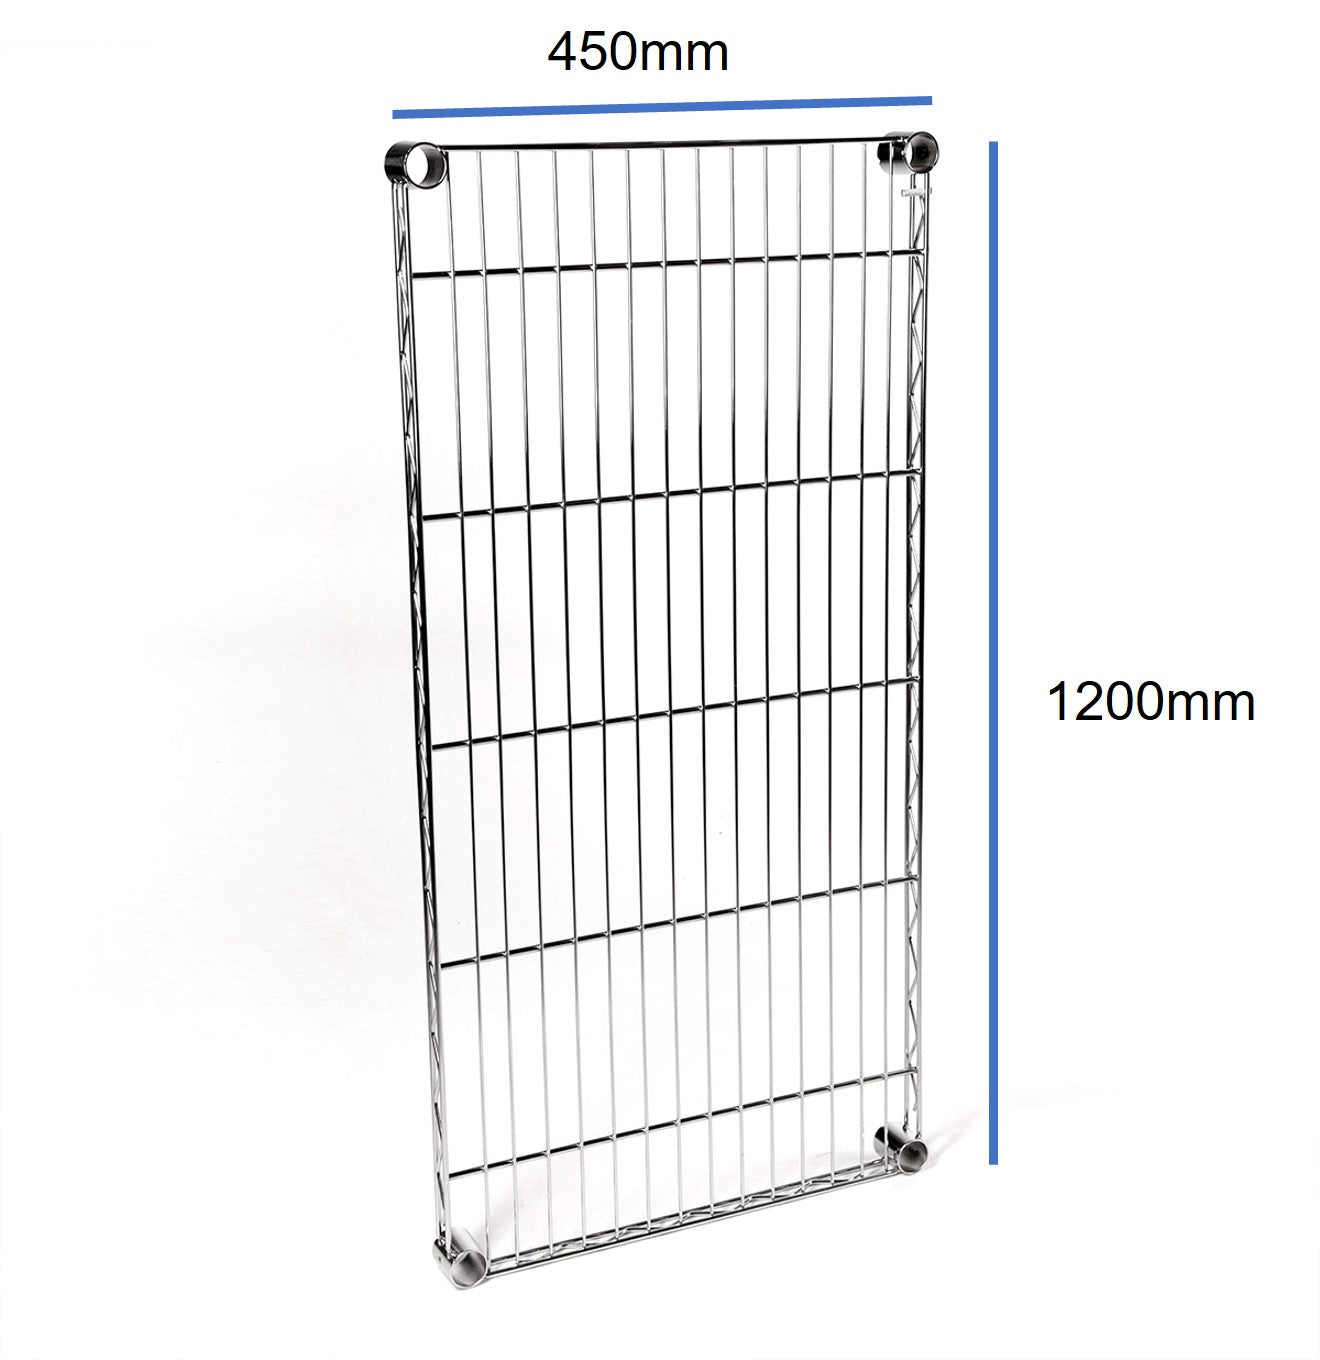 Sets with 1200mm x 450mm Shelves